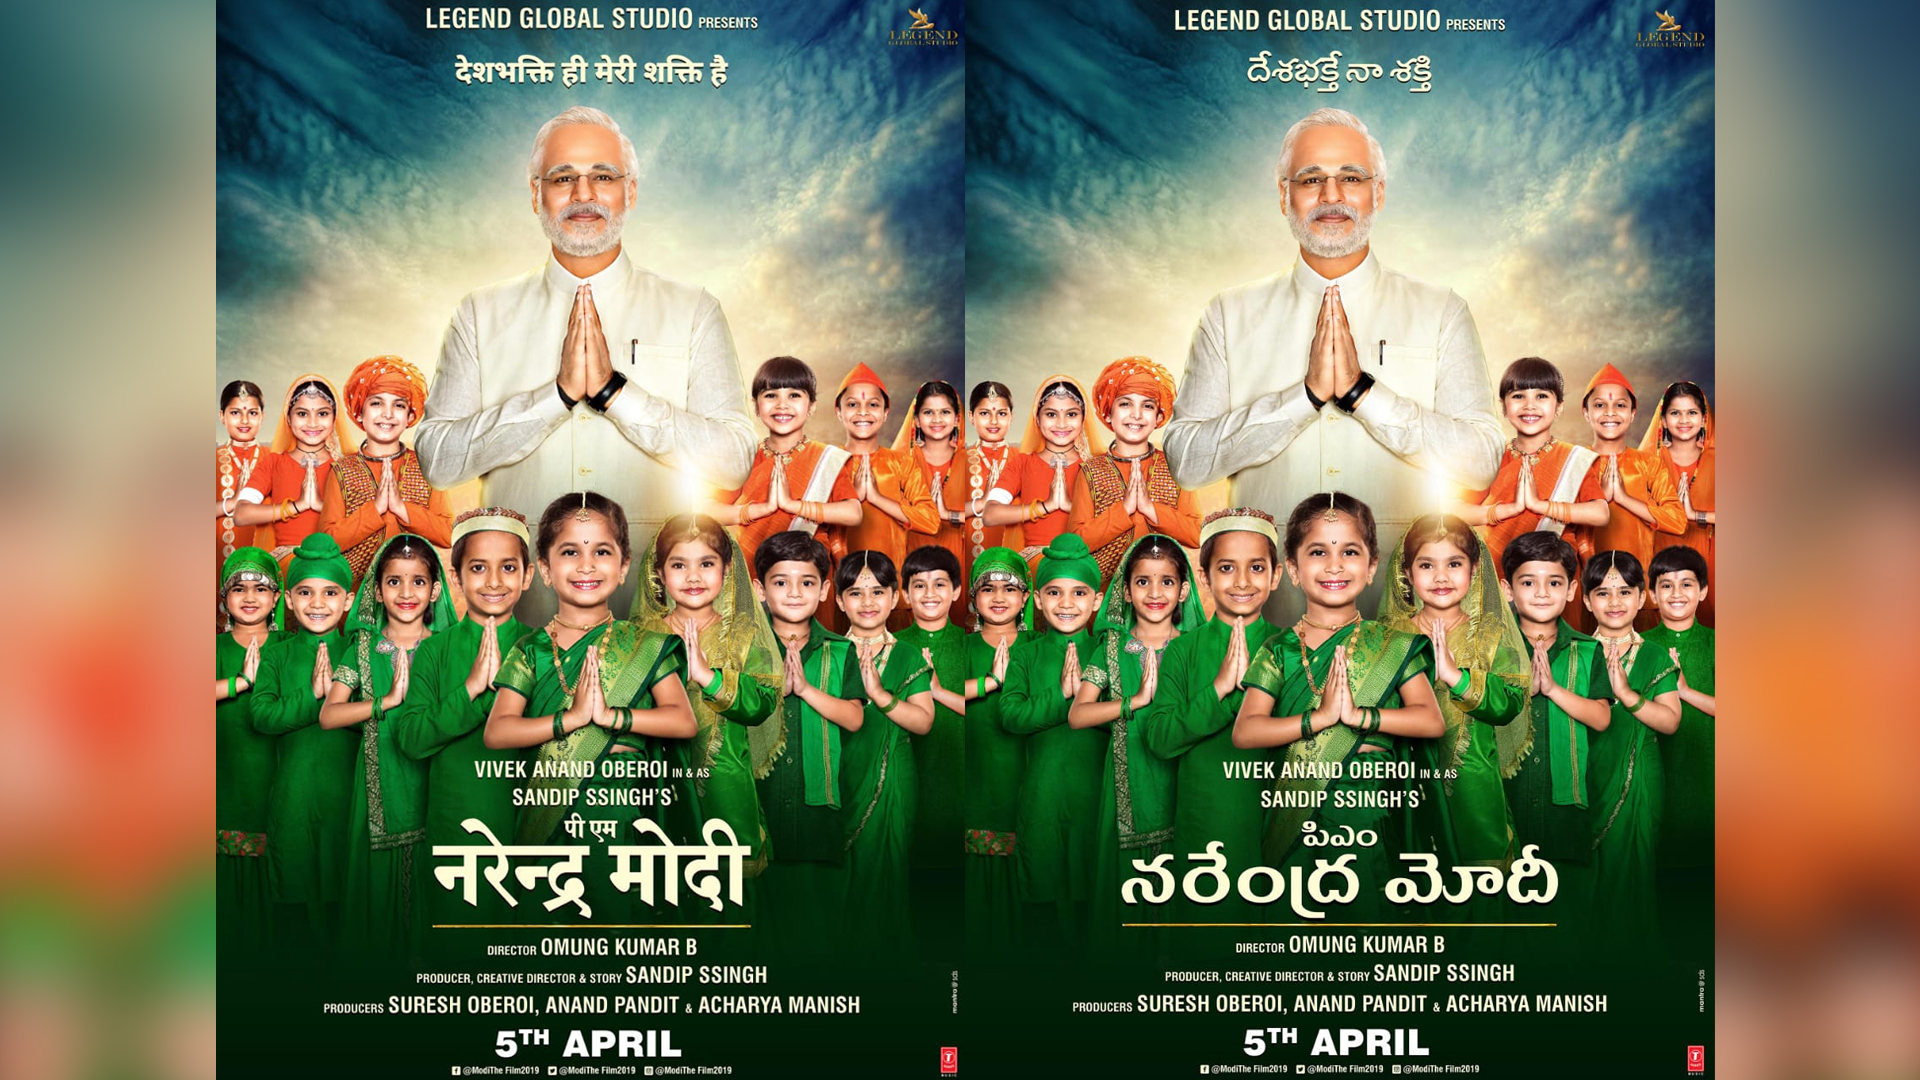 PM Narendra Modi the film to hit the theatres early,new release date : 5th April 2019